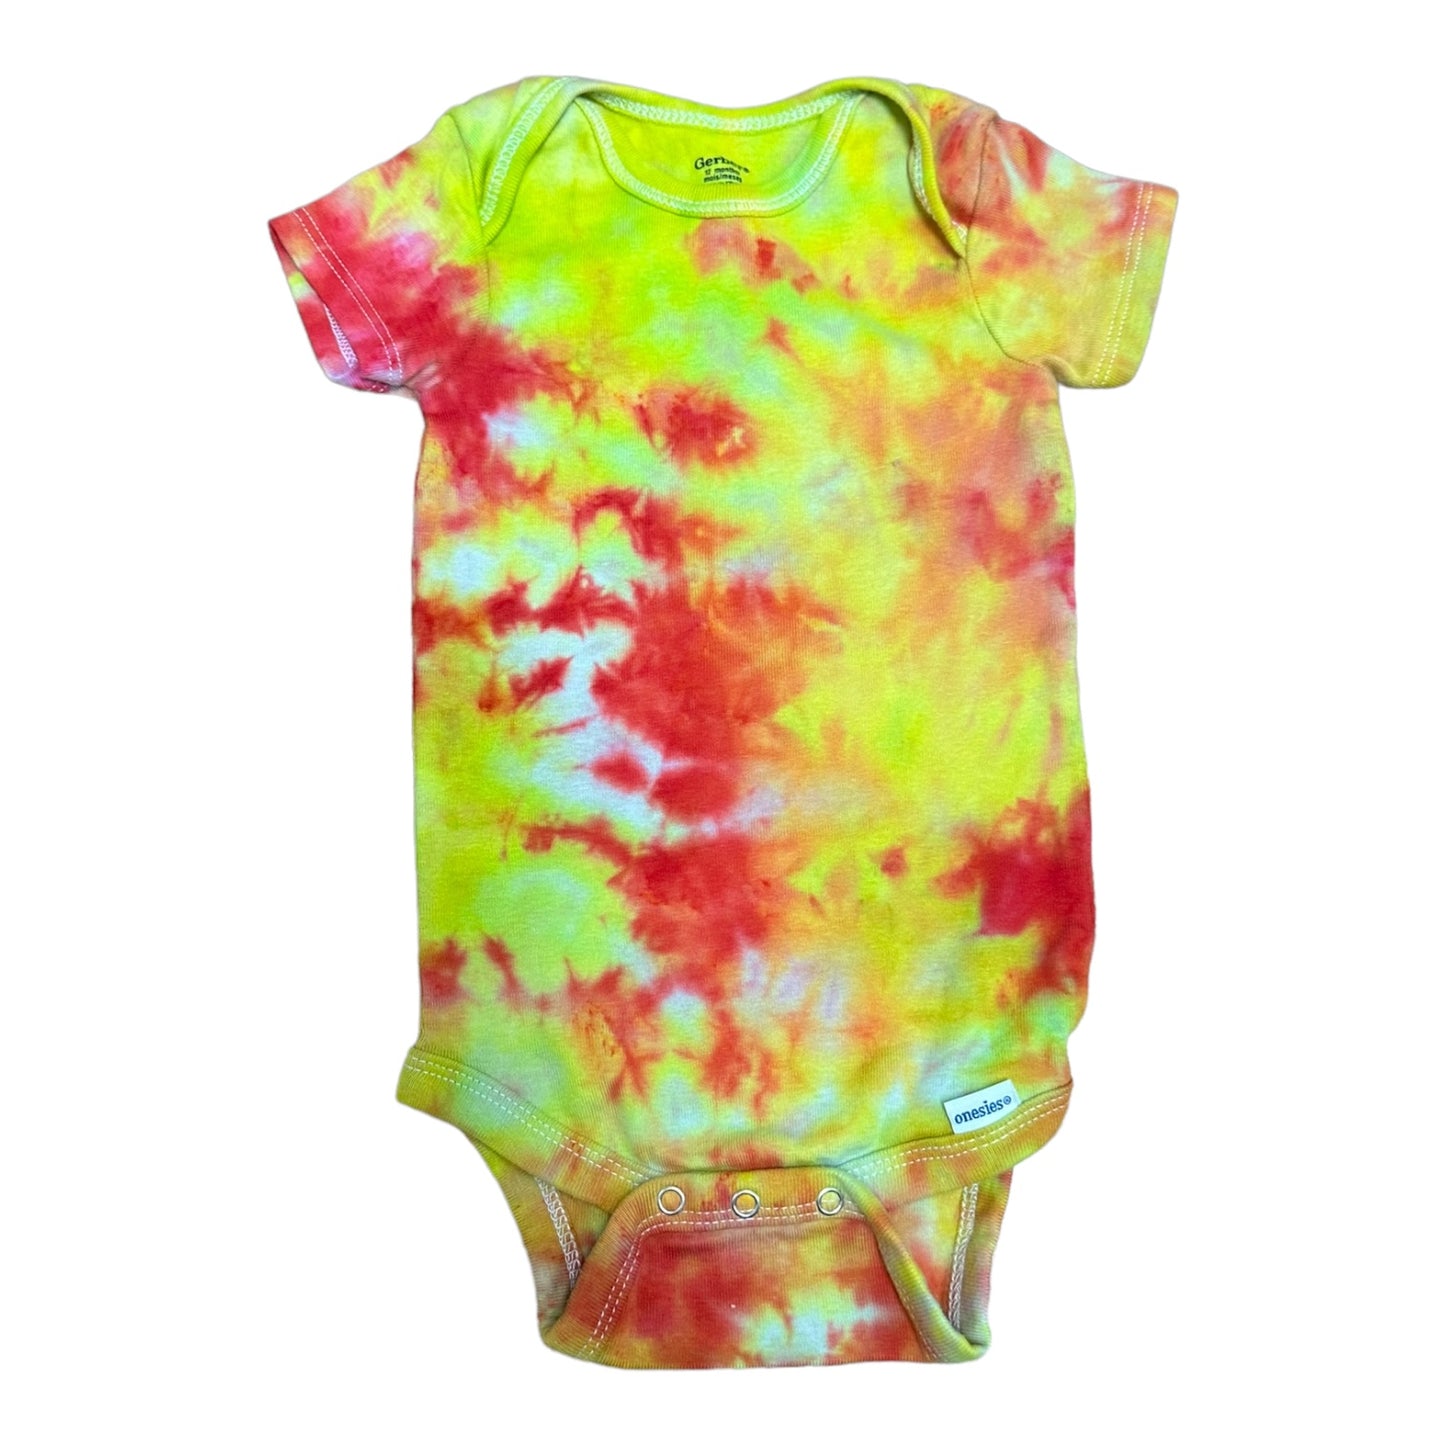 Infant 12 Months Yellow Green and Pink Scrunch Ice Dye Tie Dye Onesie